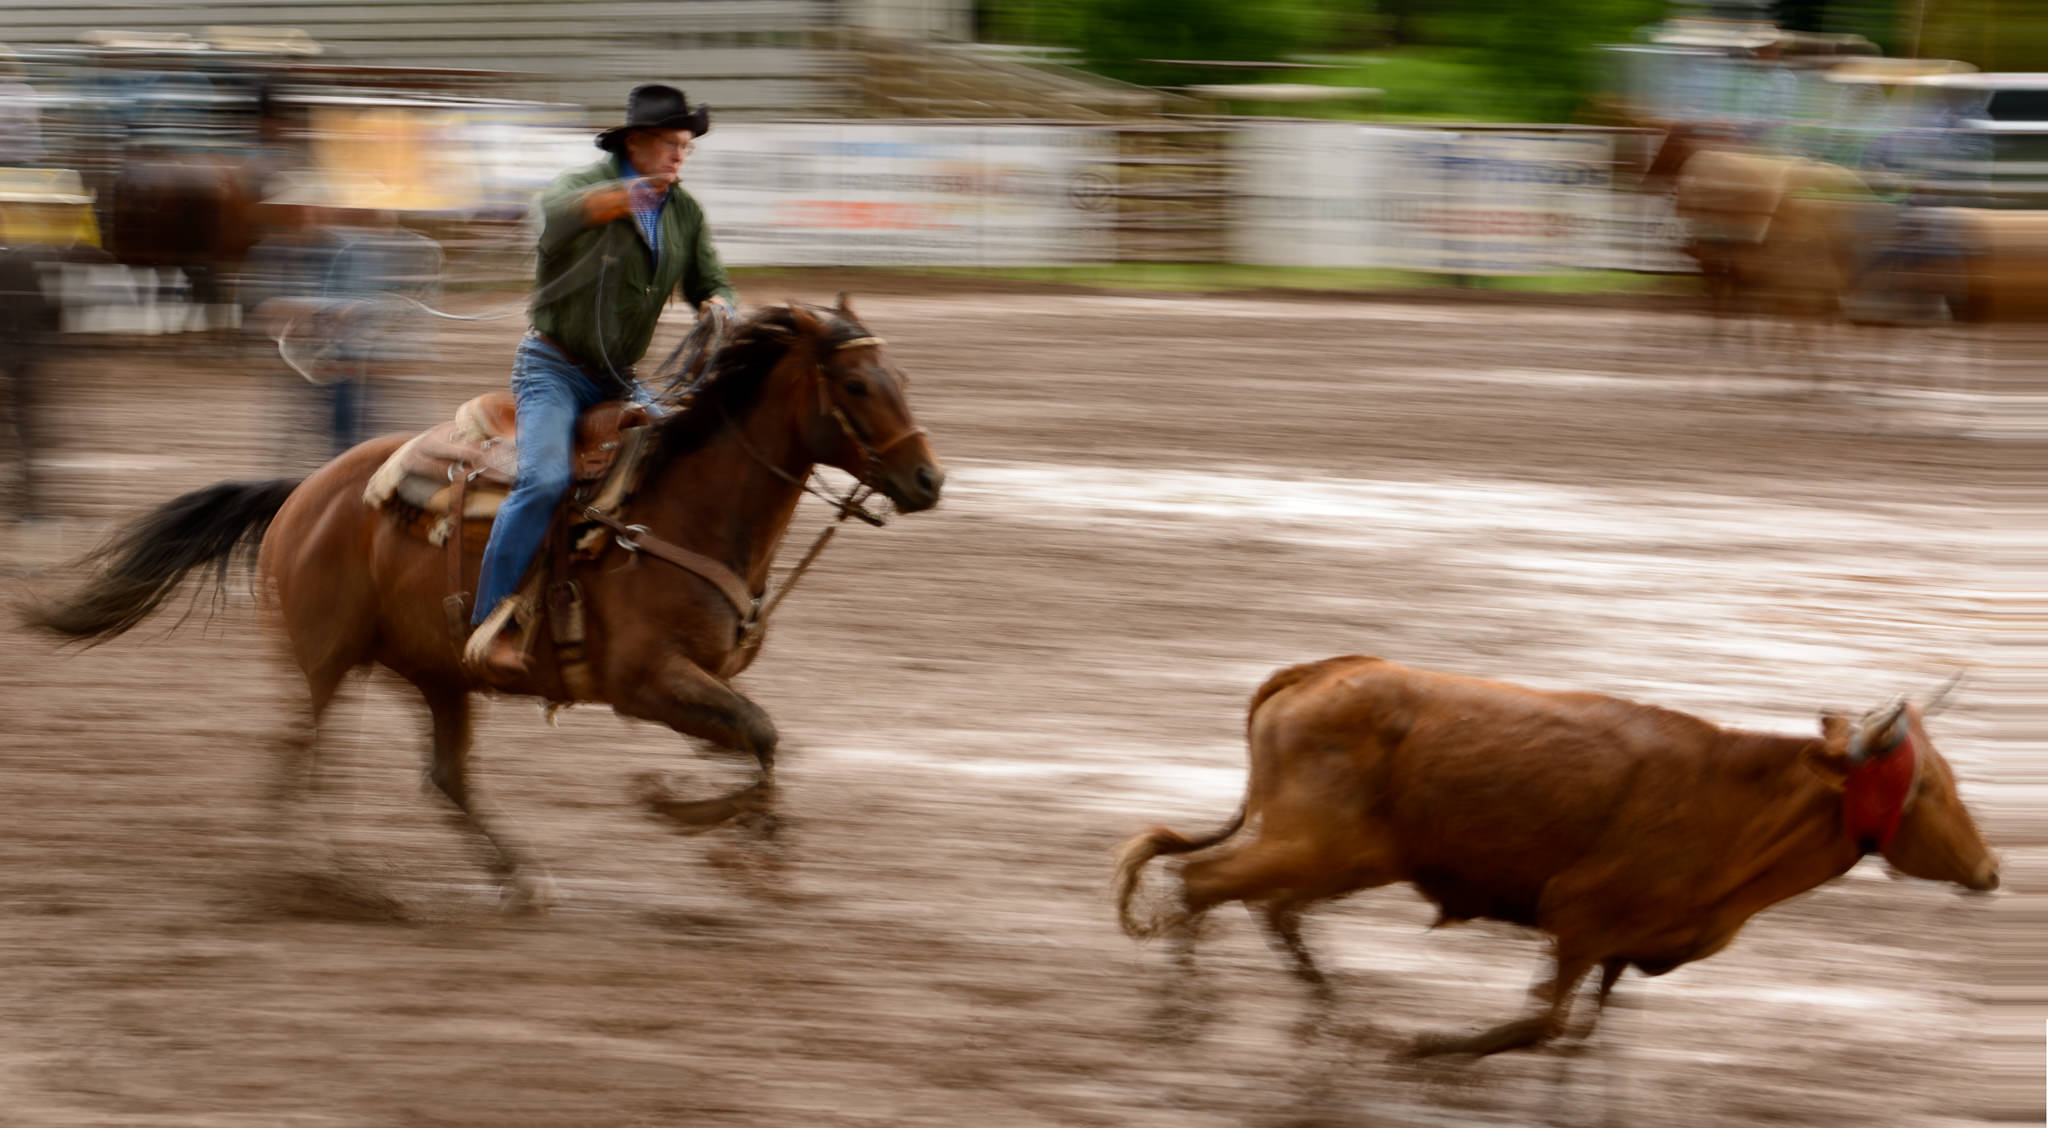 George Hendrix captures a Team Roper at another soggy rodeo.